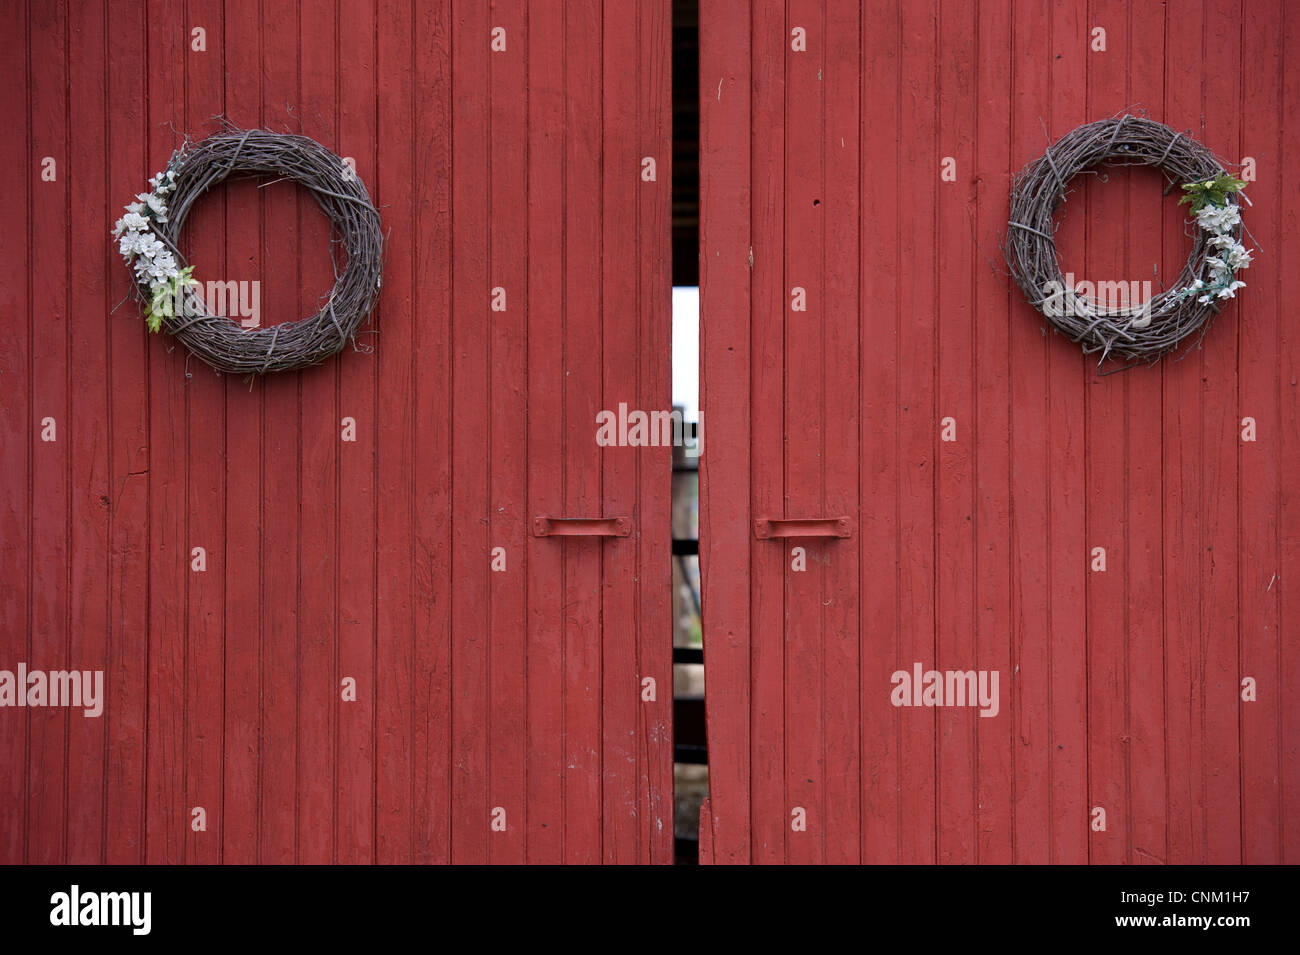 Grapevine wreath decorations hanging on red barn doors entrance. Stock Photo